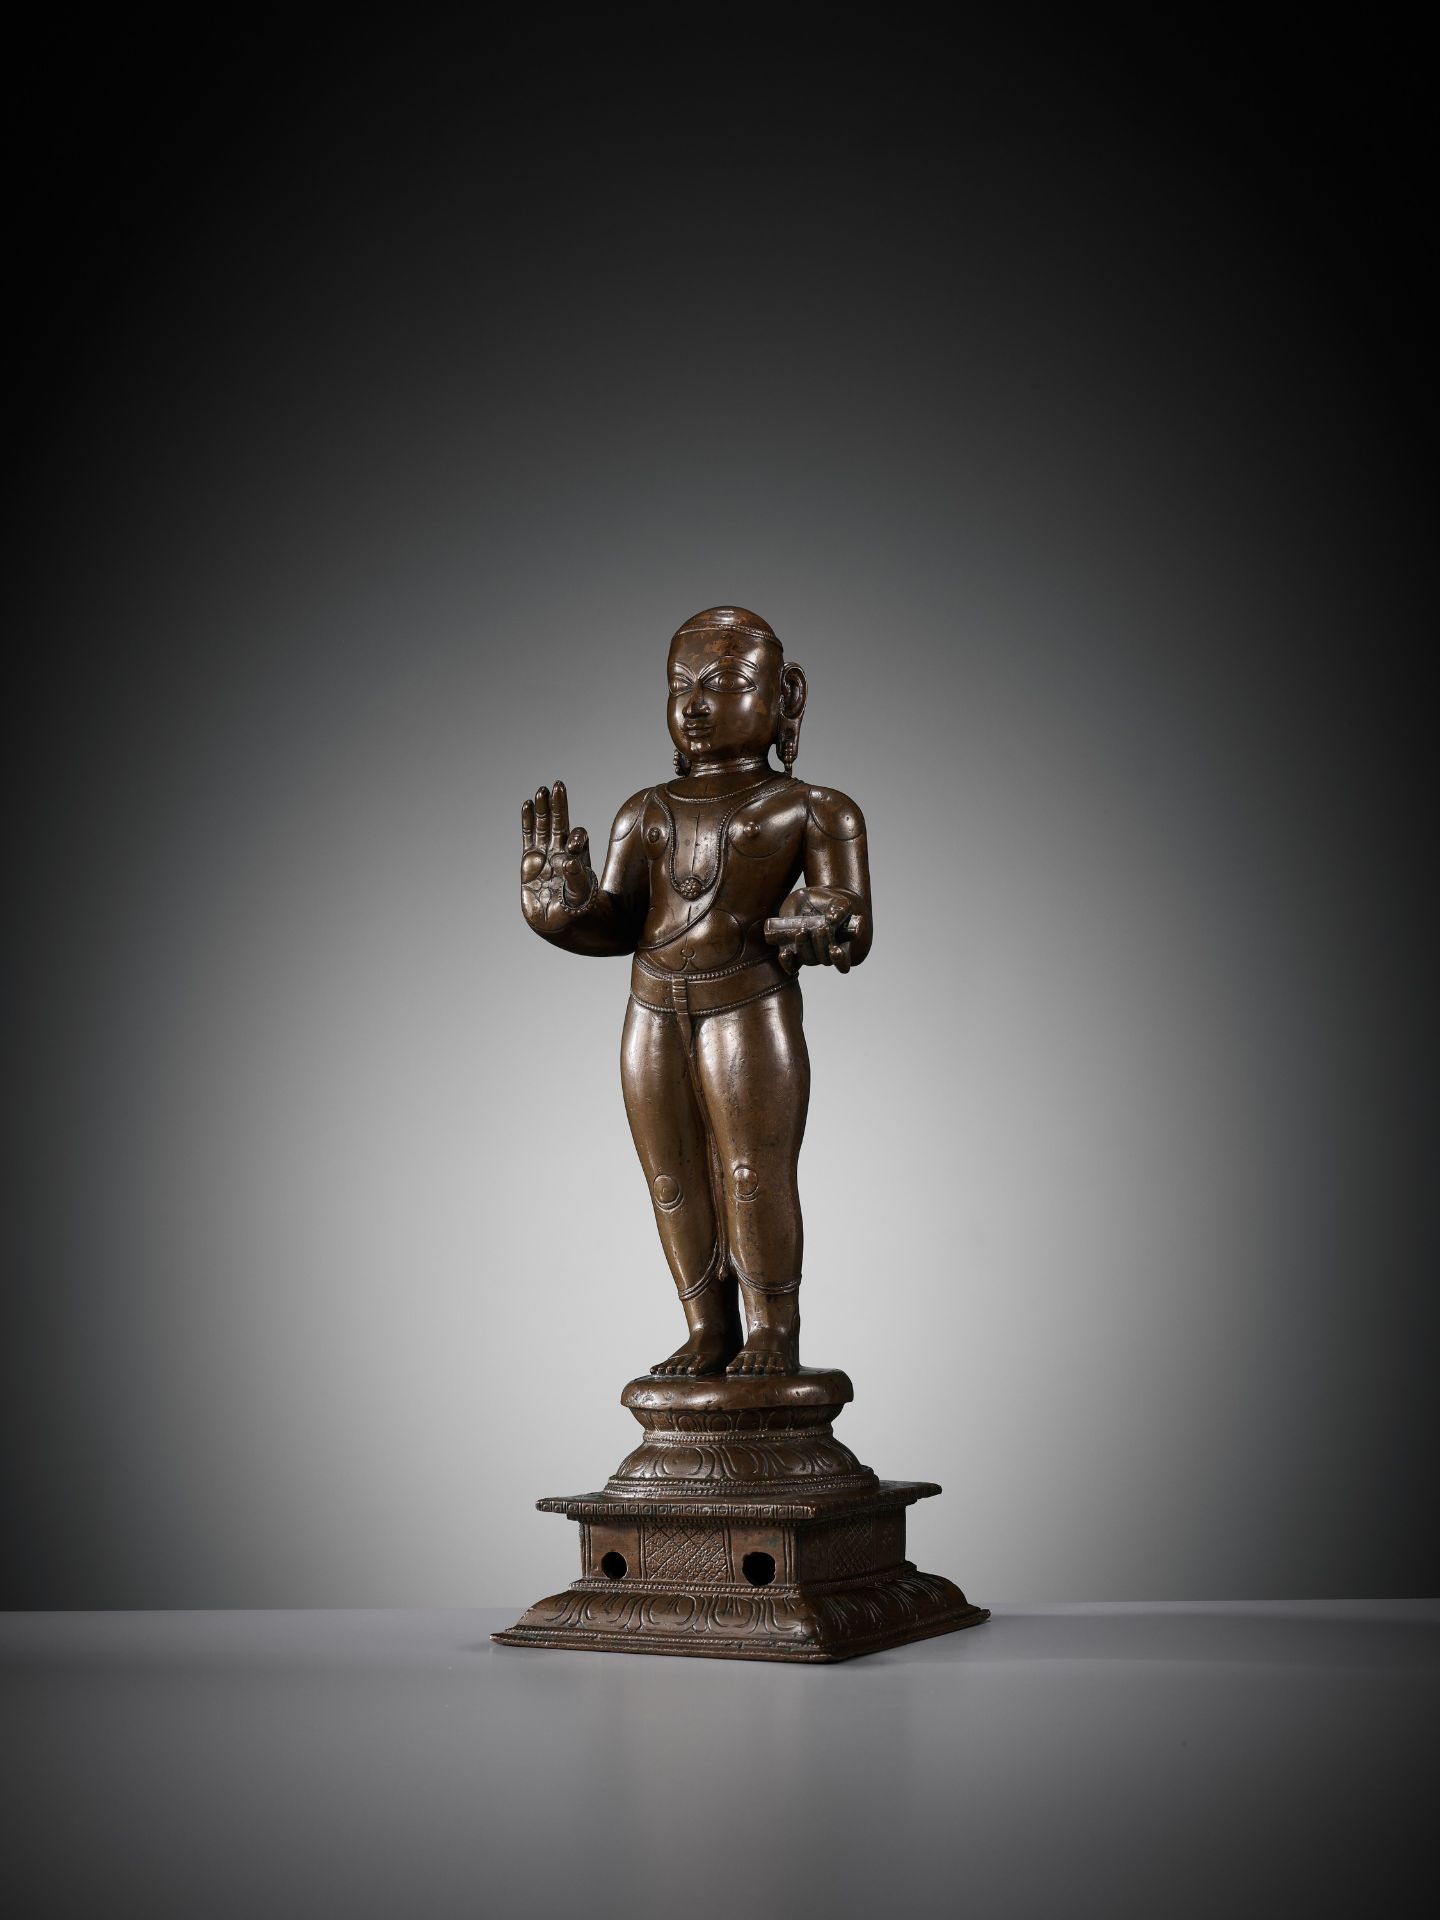 A LARGE COPPER ALLOY FIGURE OF MANIKKAVACAKAR, TAMIL NADU, 14TH-15TH CENTURY - Image 8 of 16